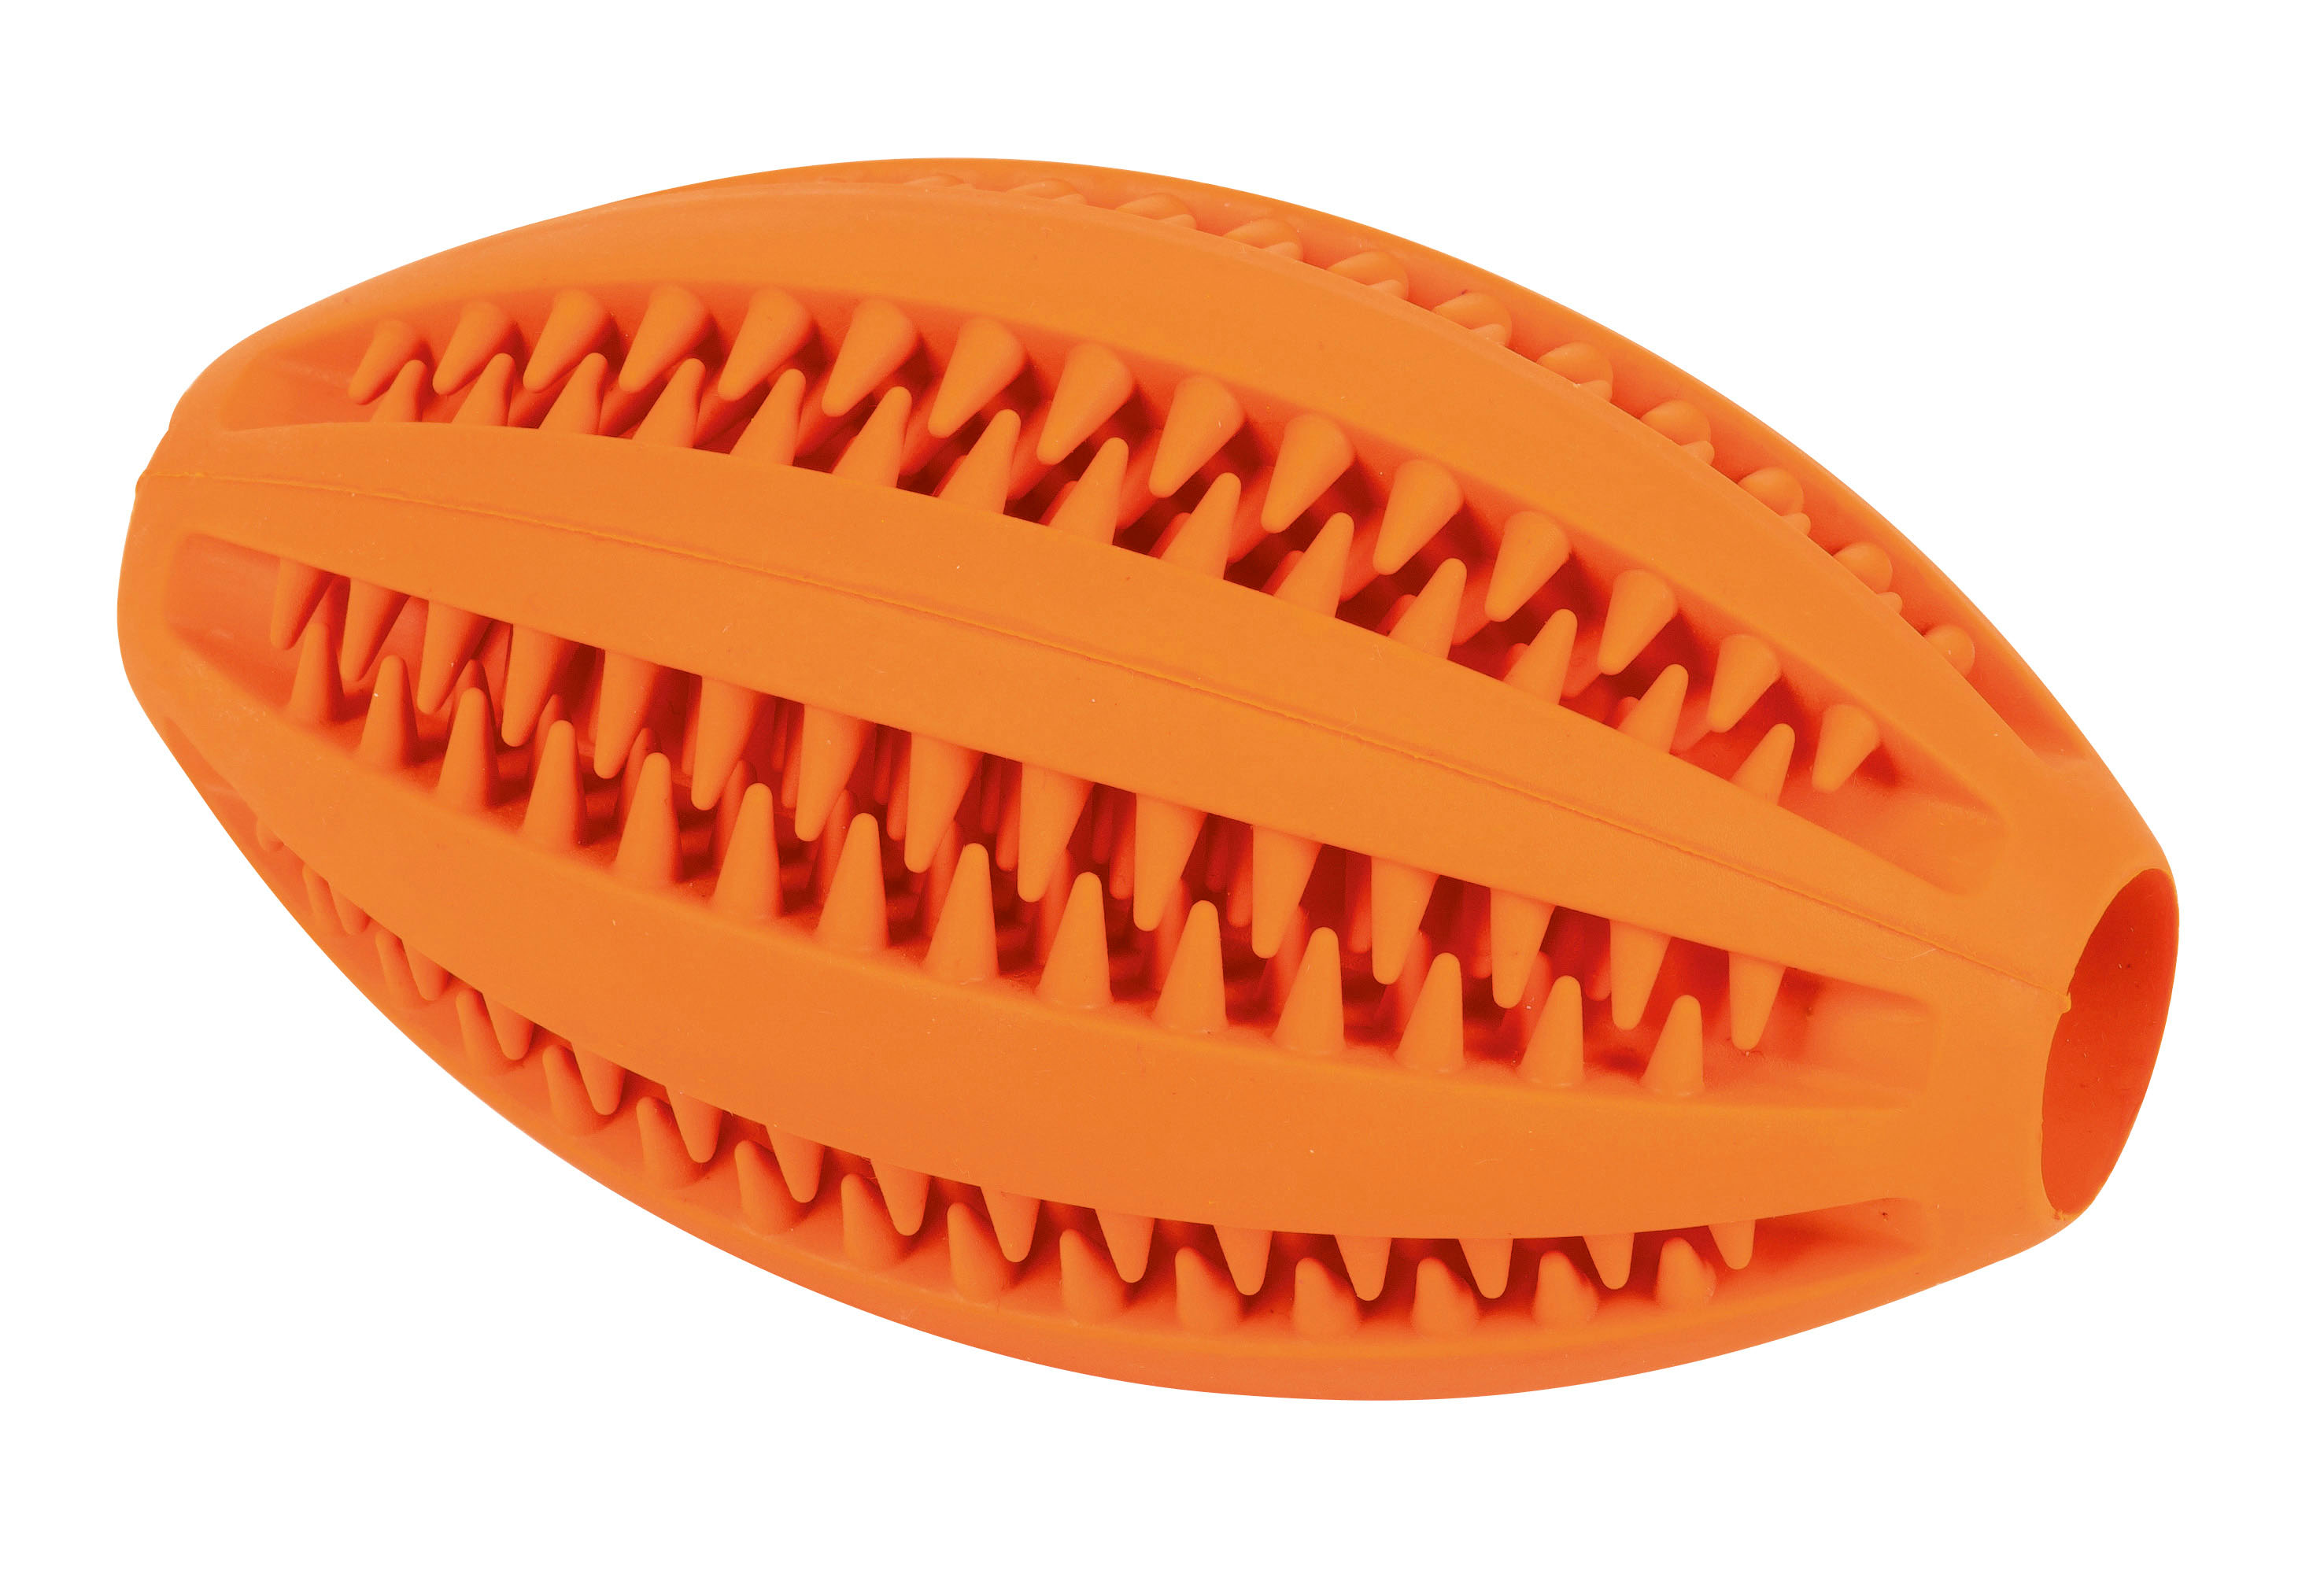 GOOD RUBBER RUGBY SPIKES ORANJE 11,5x6,3x6,3cm